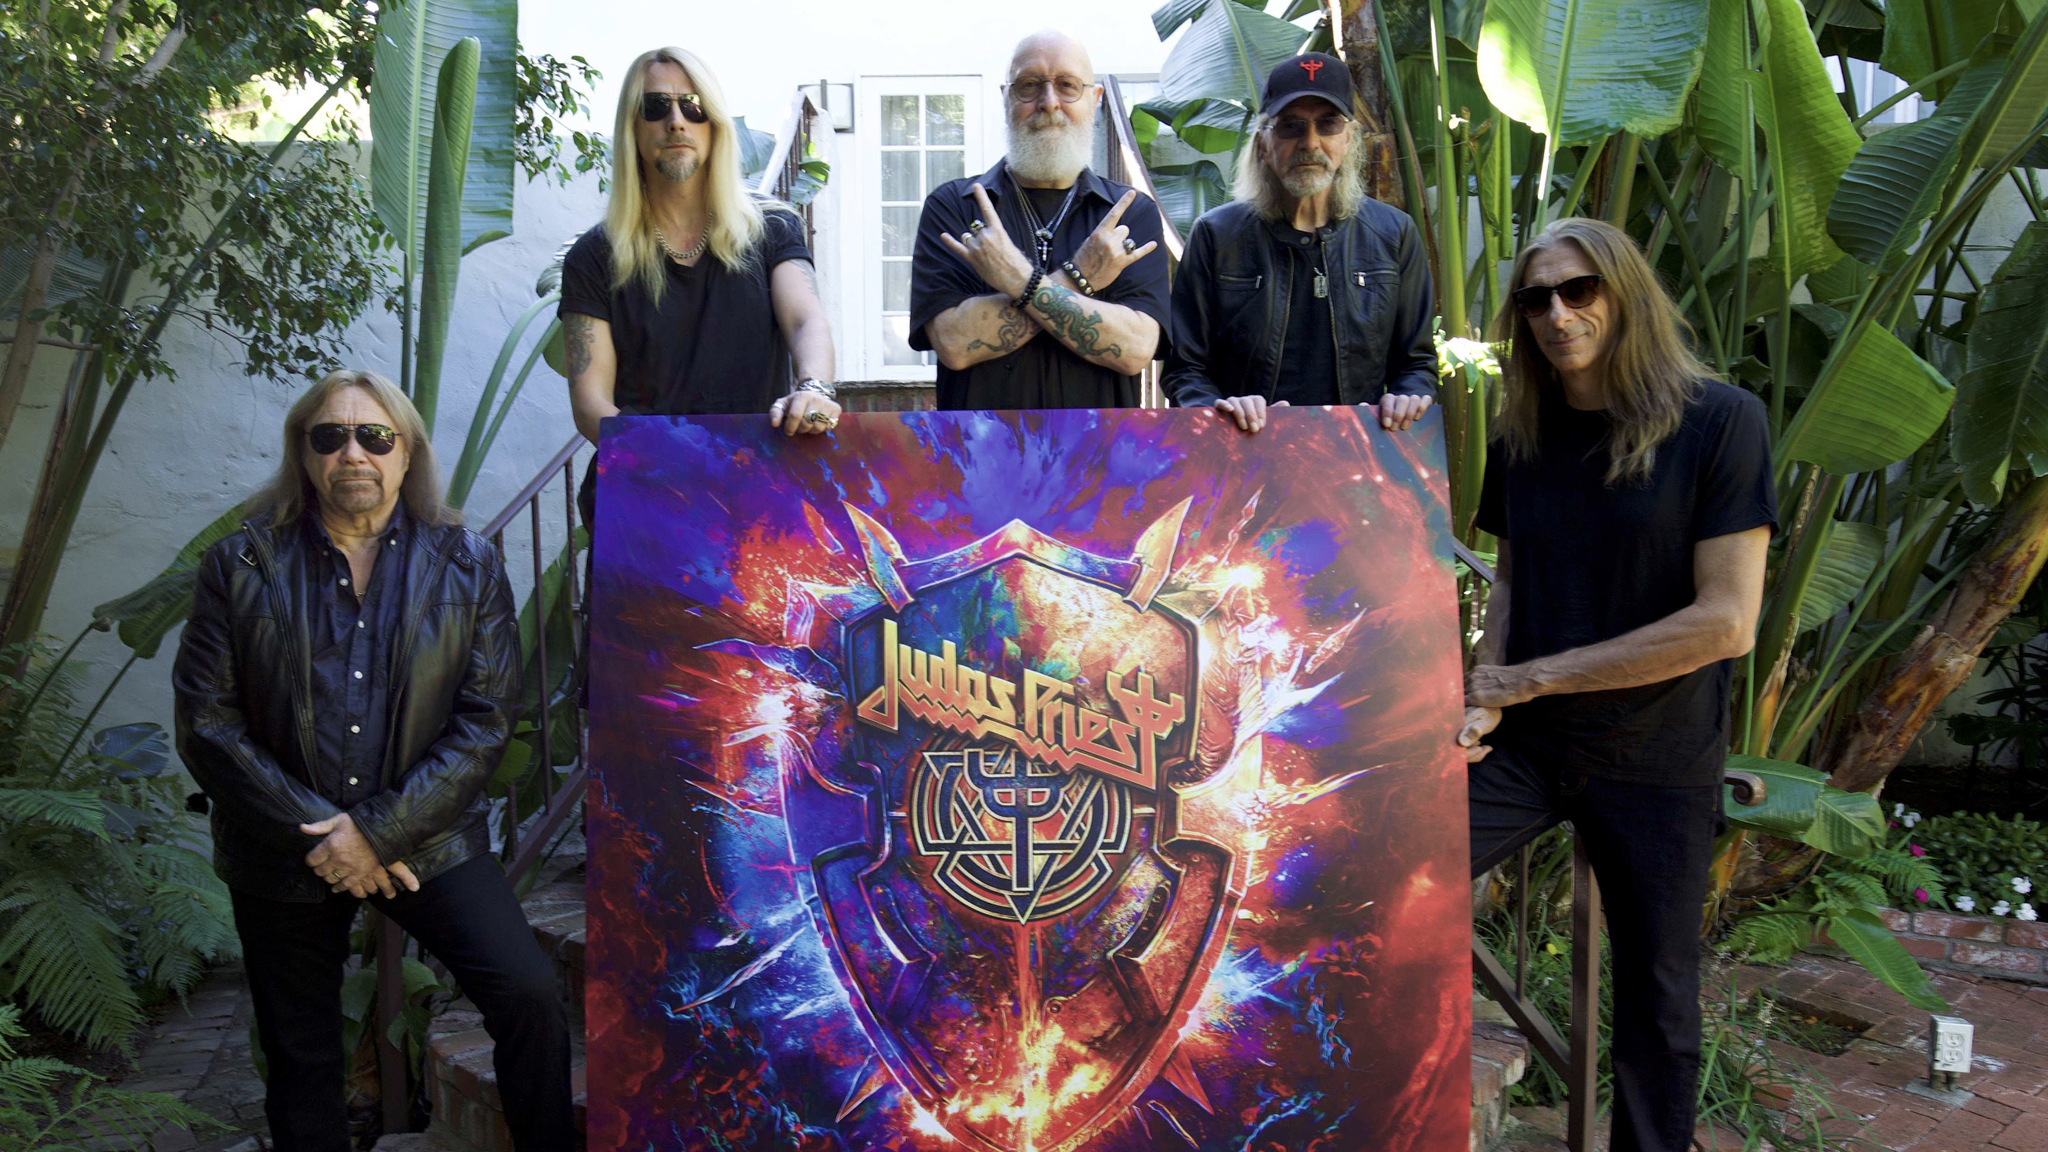 Judas Priest show the kids how its done on new album ‘Invincible Shield’